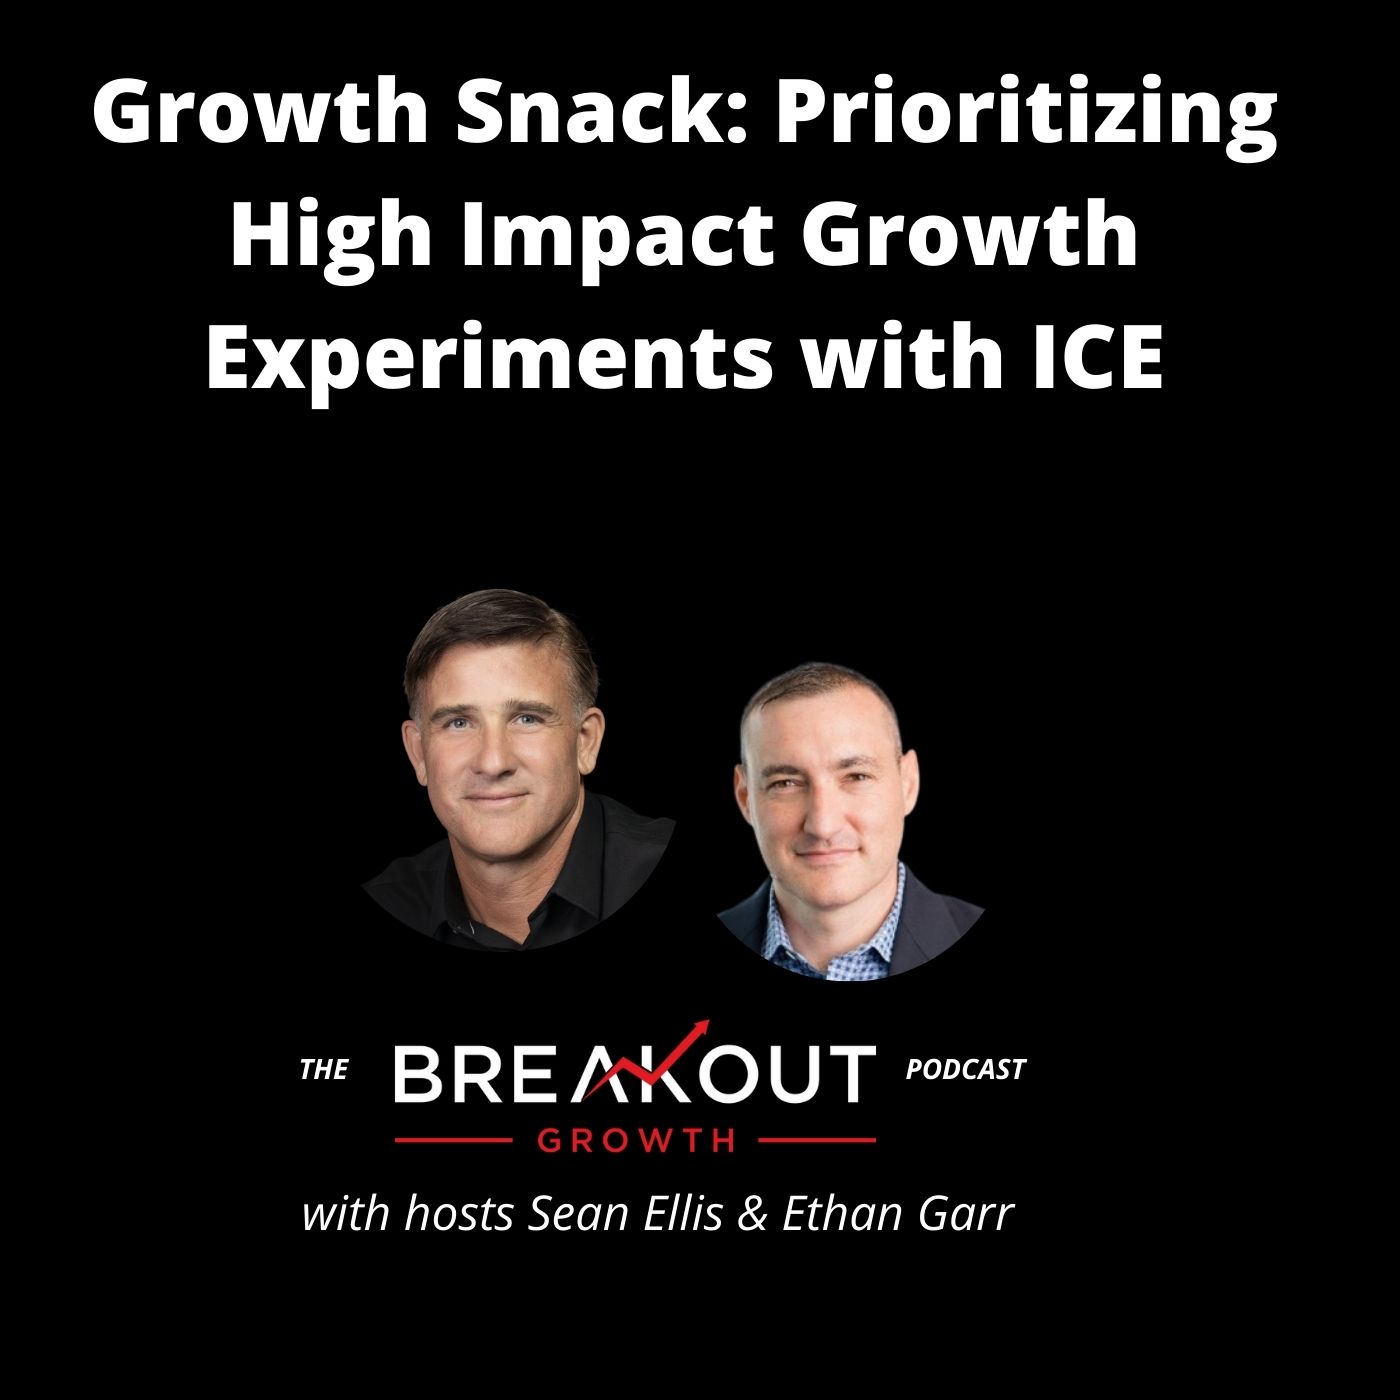 Growth Snack: Prioritizing High Impact Growth Experiments with ICE